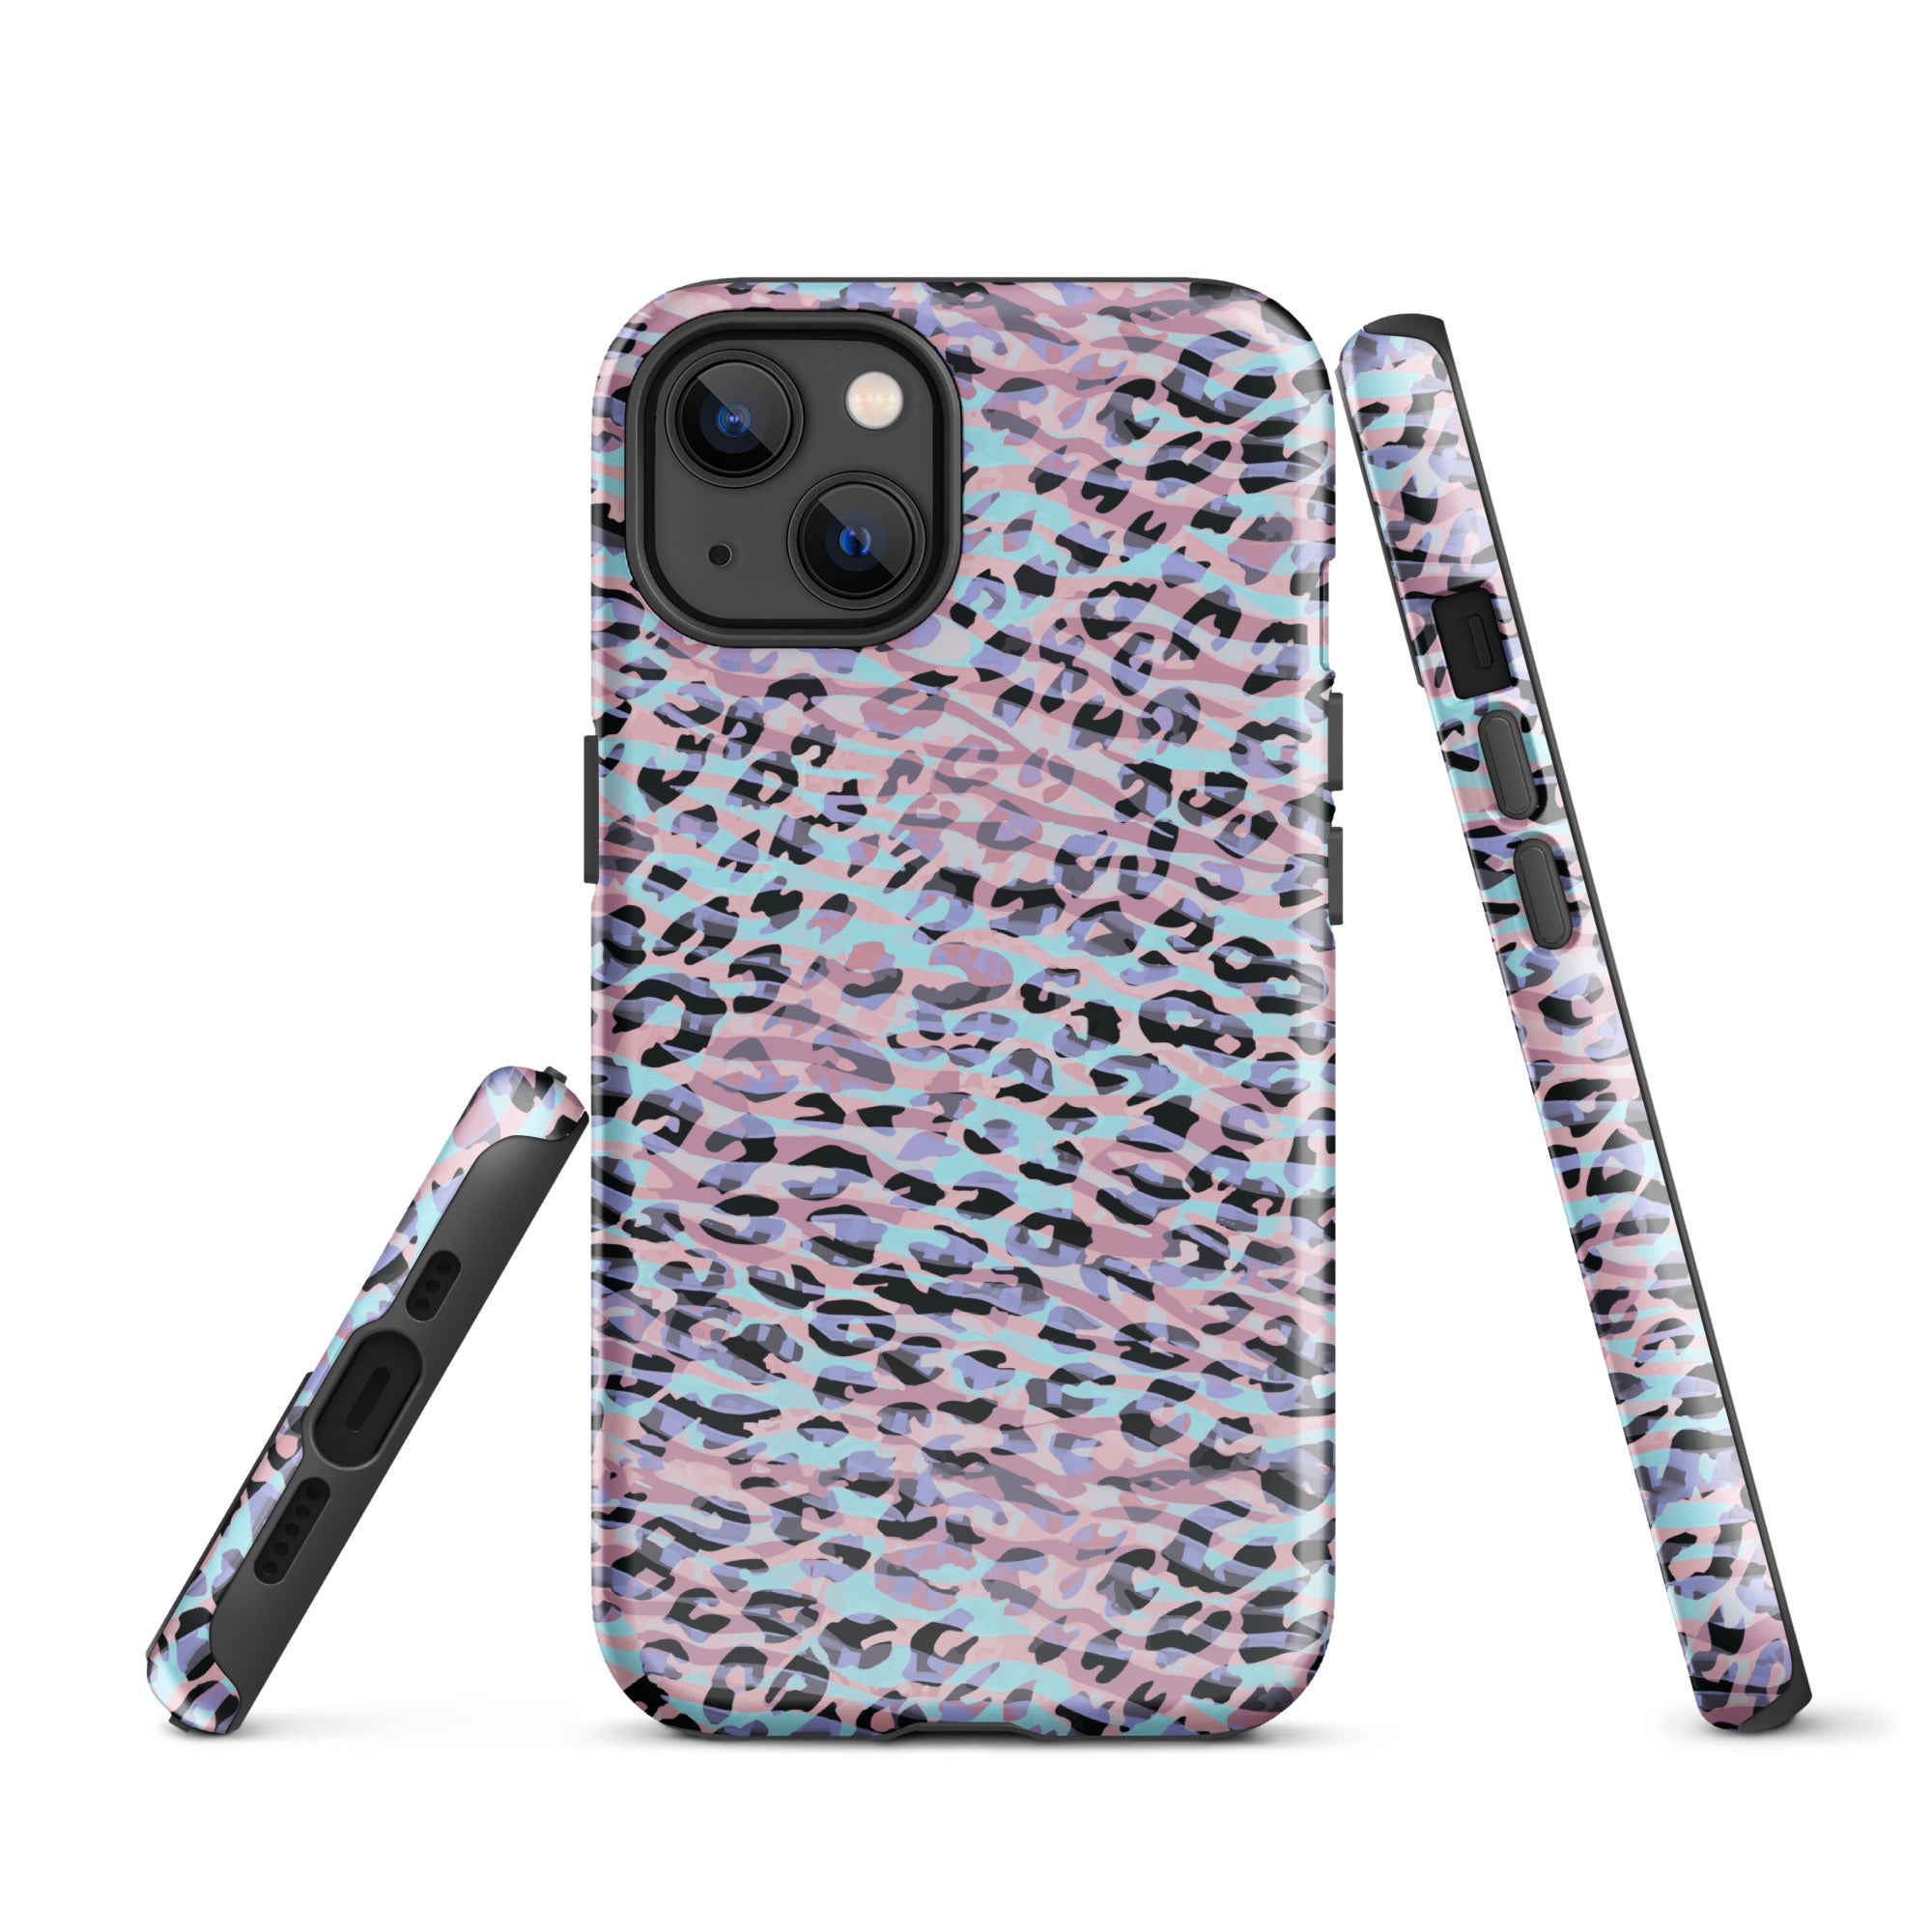 Tough Case for iPhone®- Zebra and Leopard Print Pink with Cyan